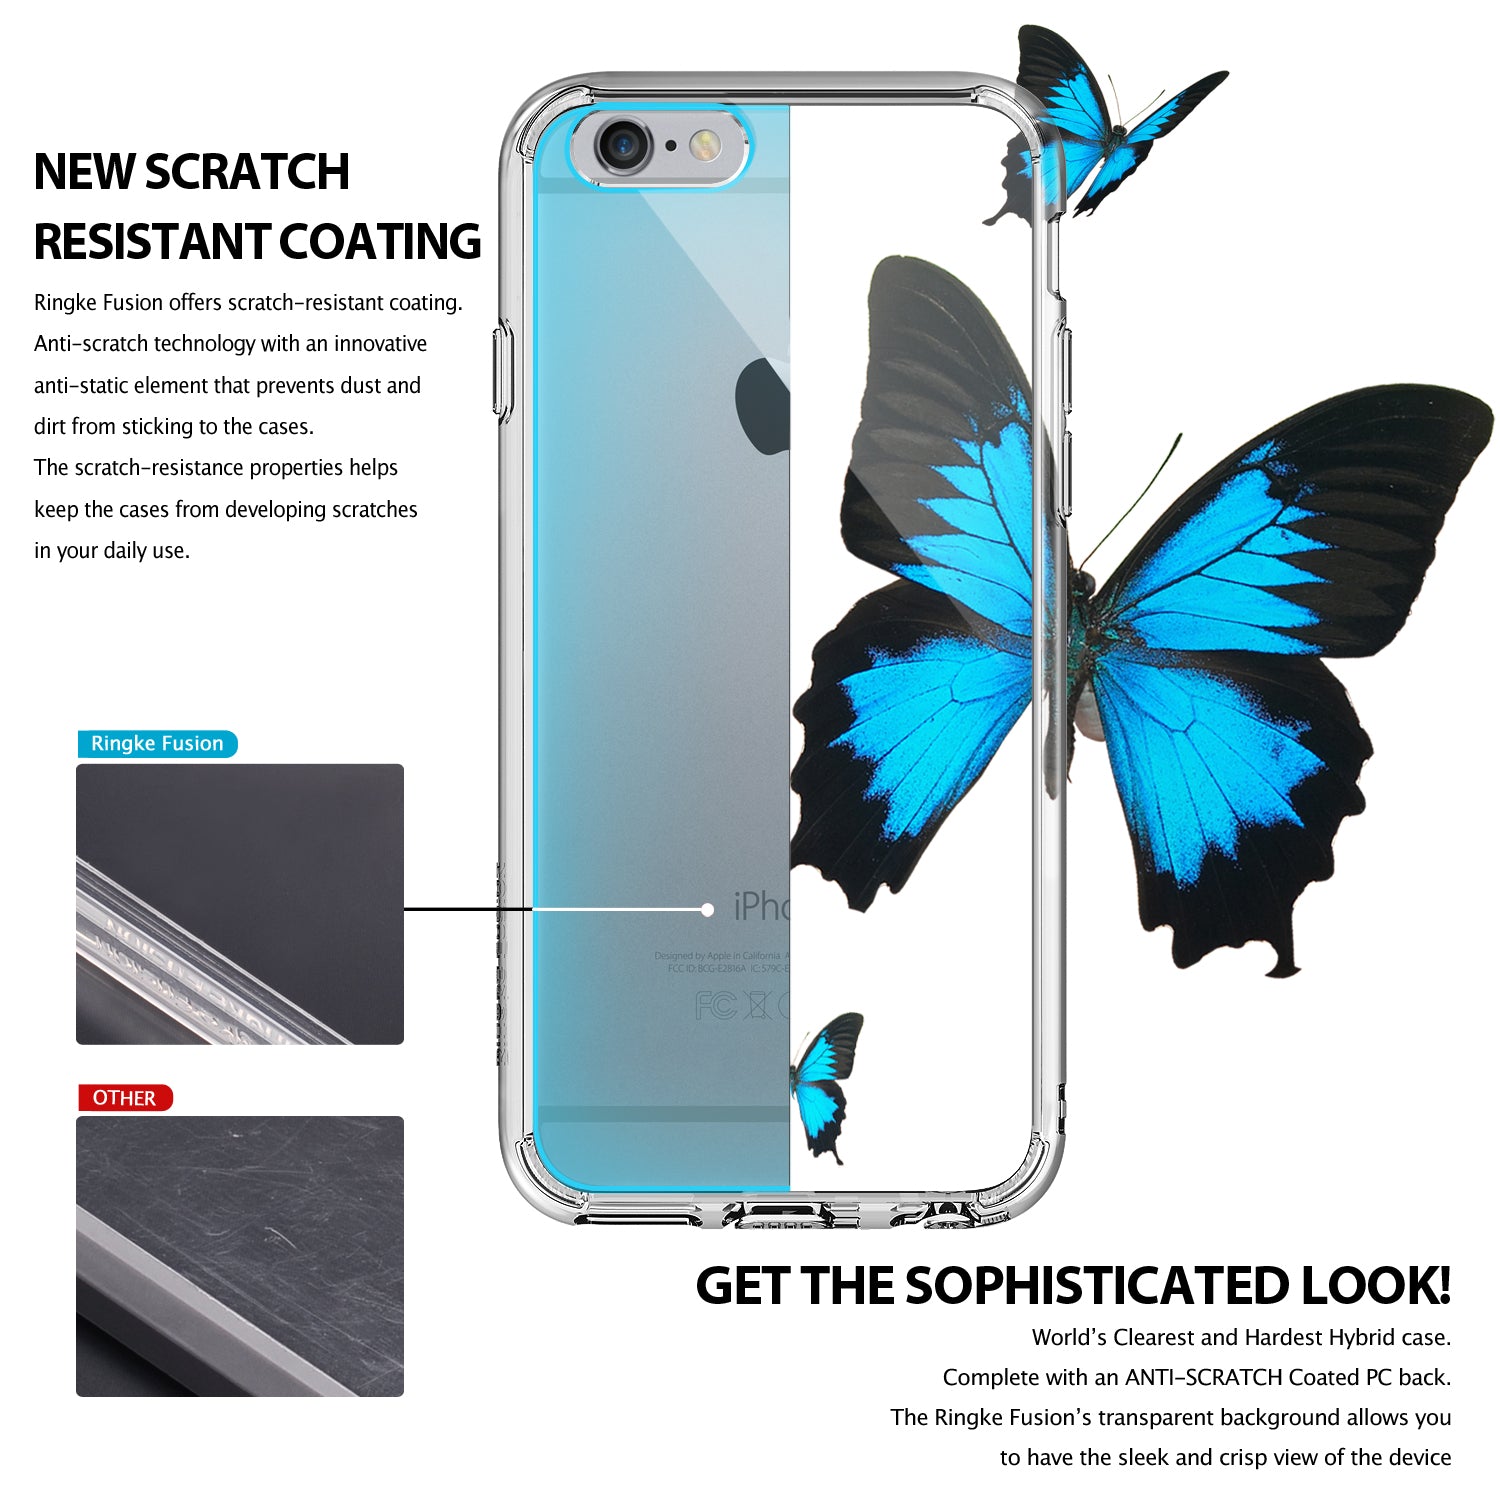 iPhone 6 Case | Fusion - New scratch resistant coating